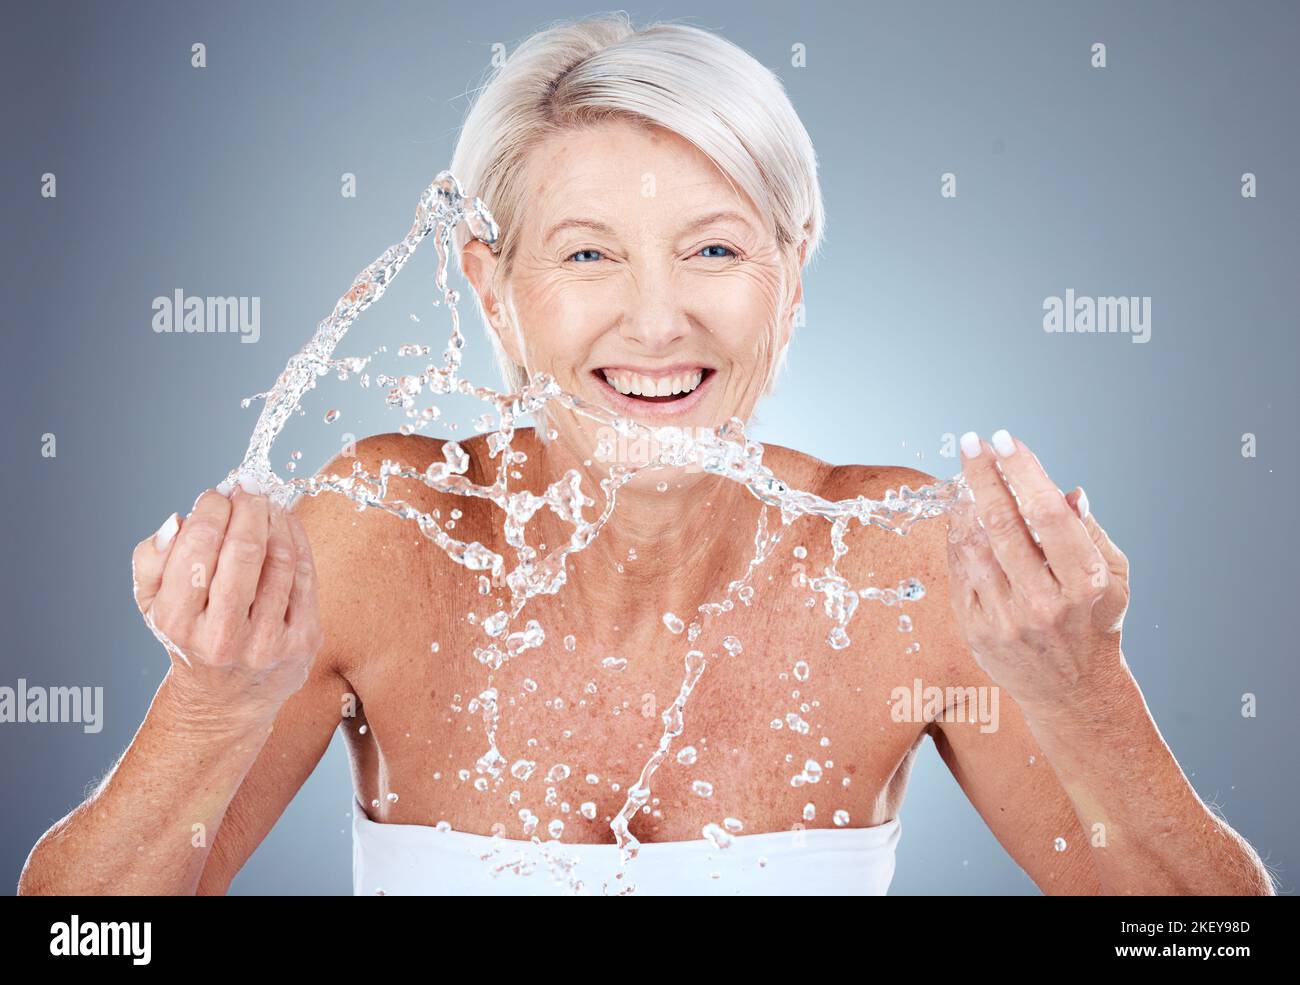 Water splash, mature woman cleaning face on gradient background for health, beauty and skin care routine. Skincare, cosmetics and portrait of happy Stock Photo